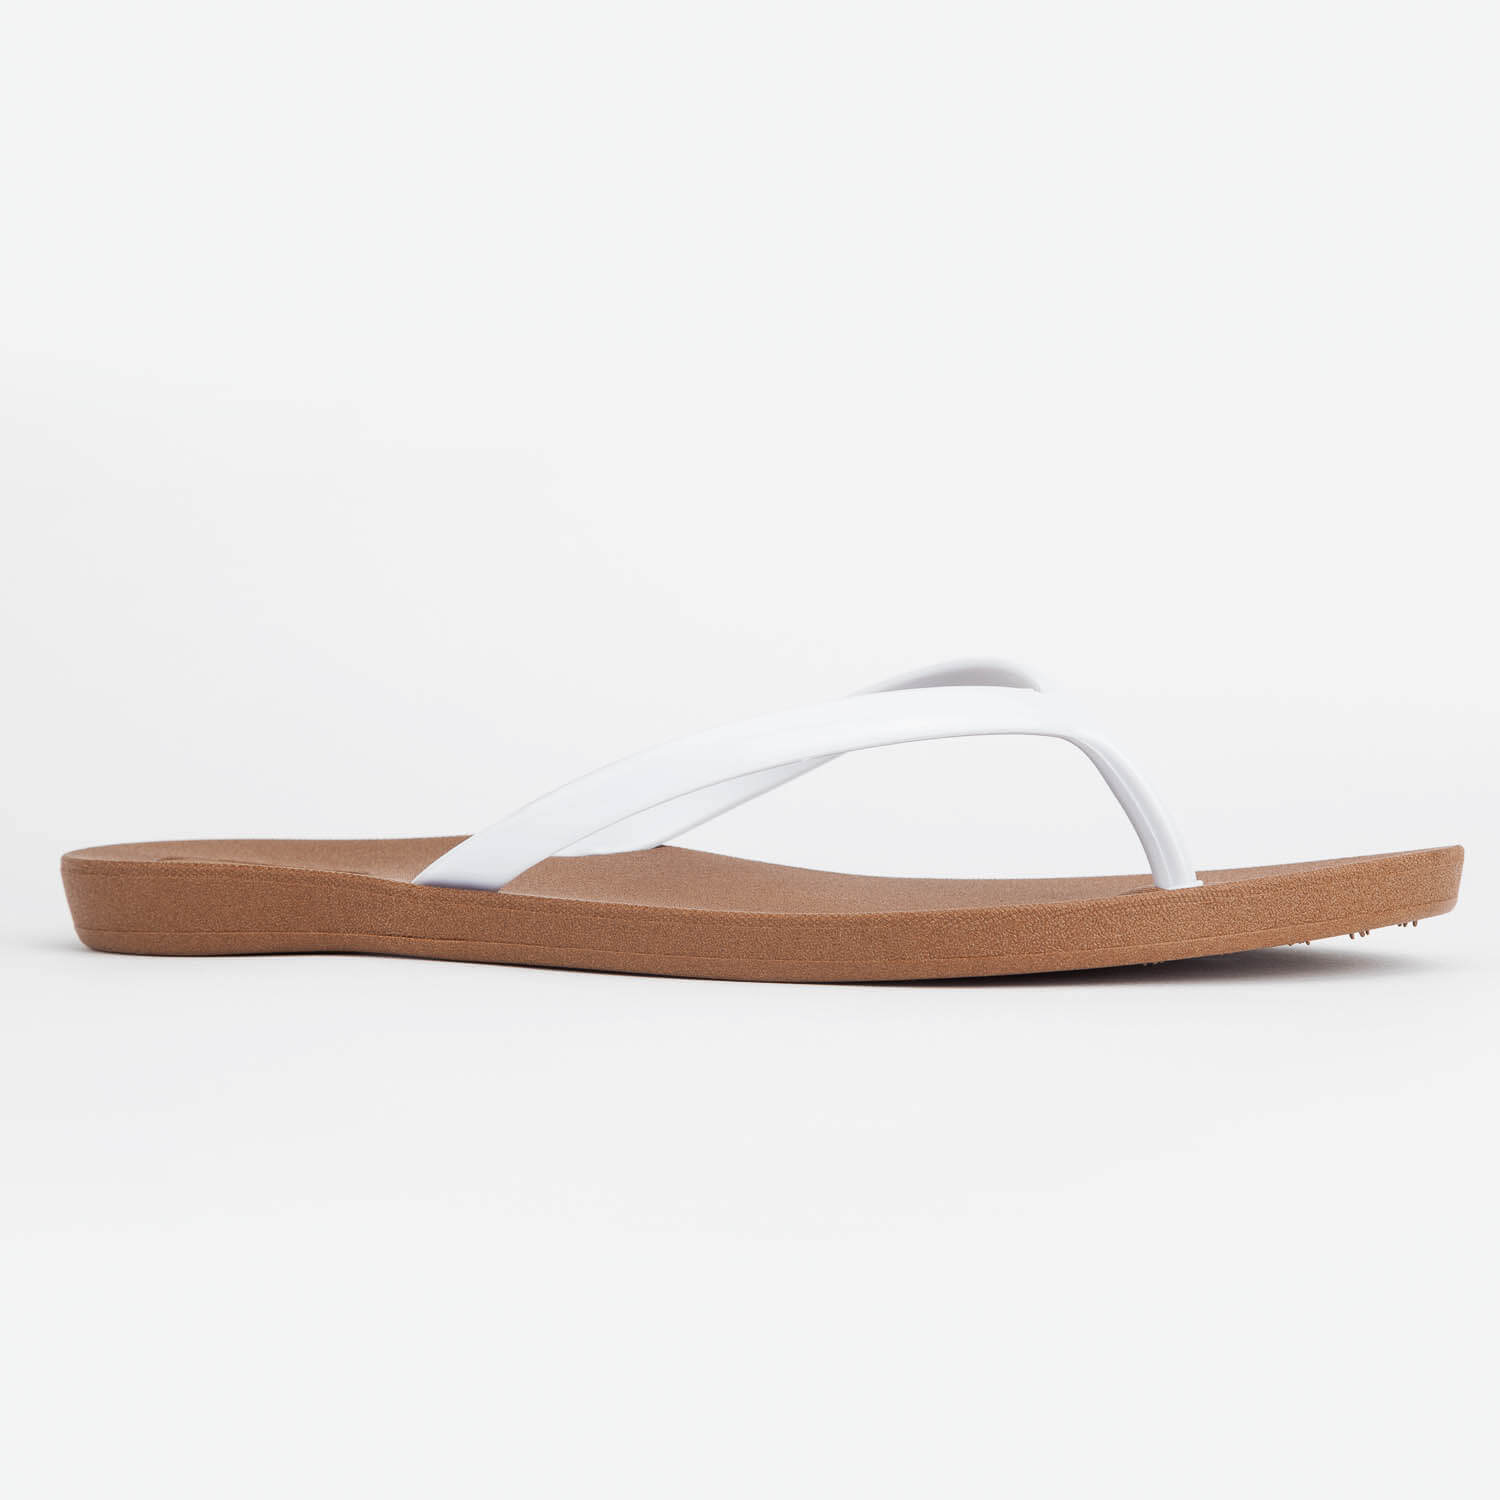 Third Oak | Recycled Women's Sandals and Flip Flops | Made in USA